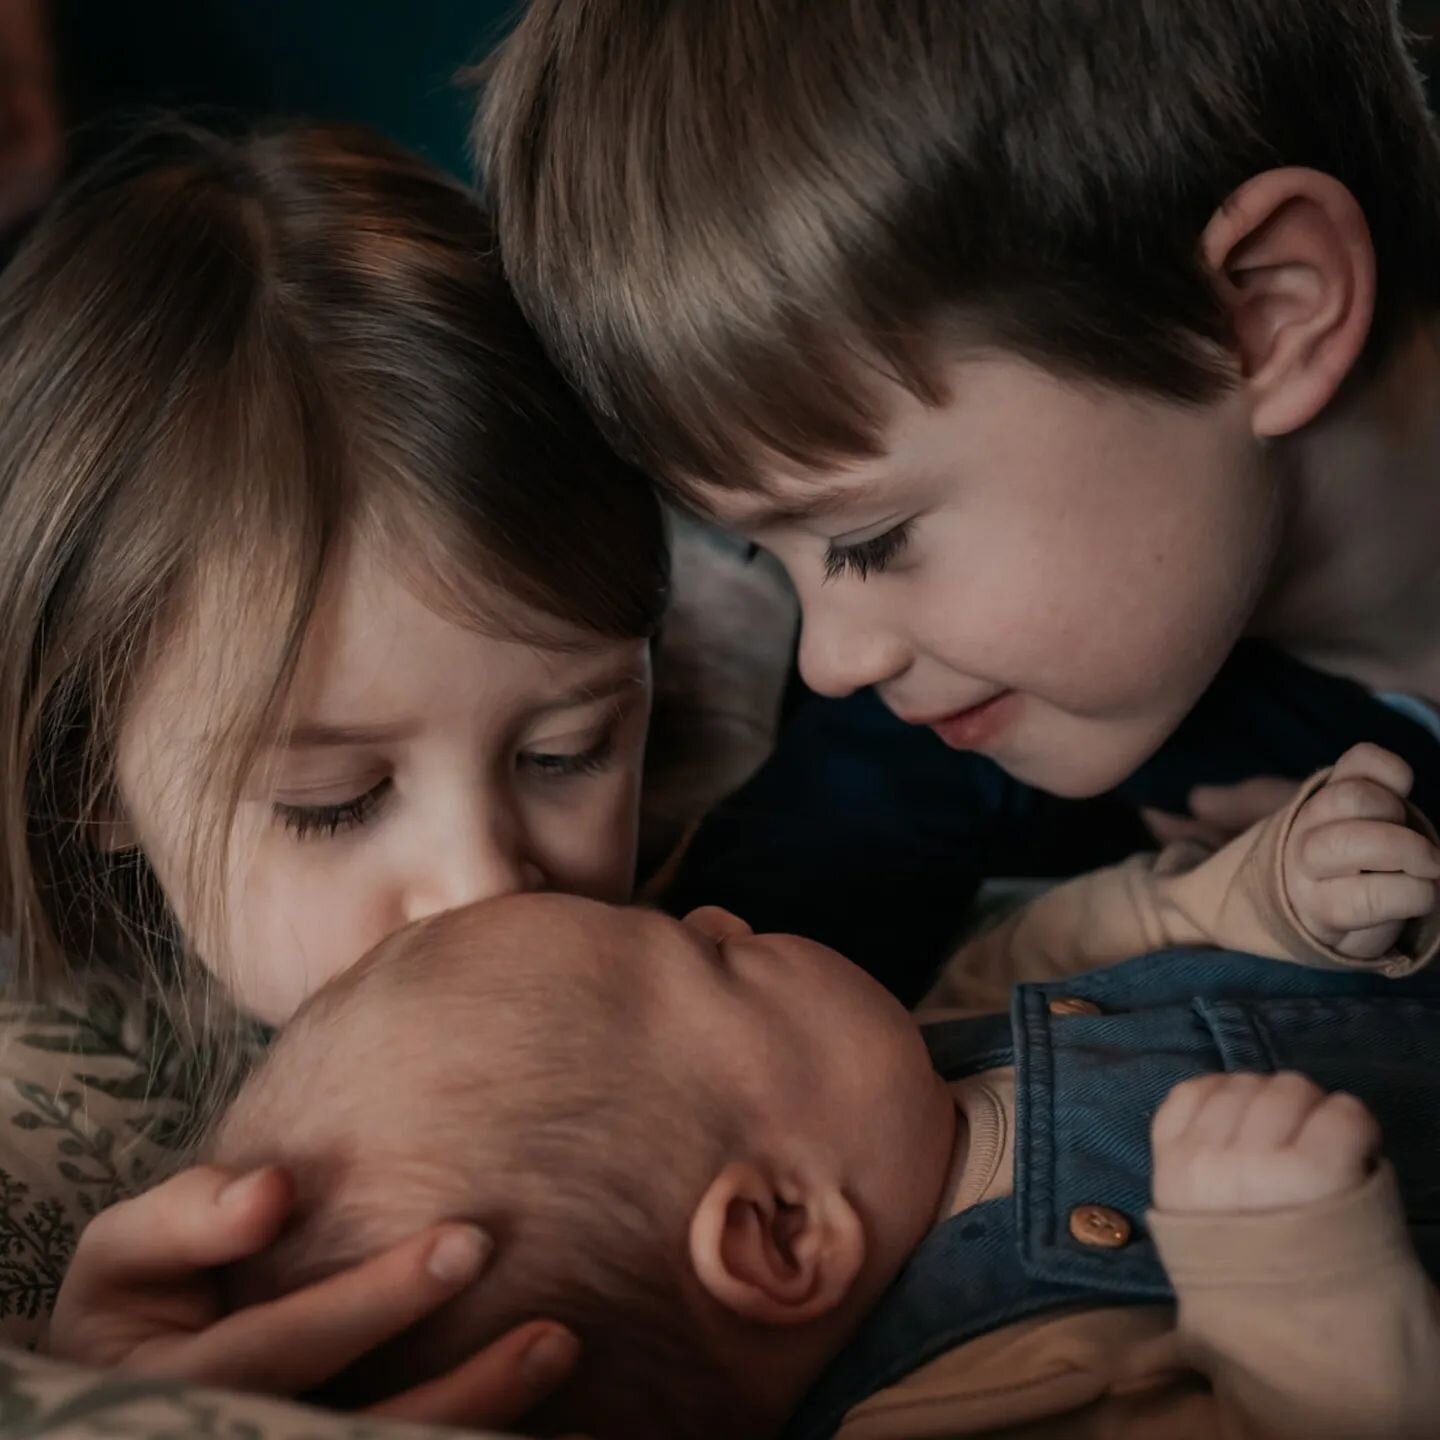 So blied I was ready with my camera when these two big siblings came bursting into the room and showered their new baby brother with love 🥰 what a moment!